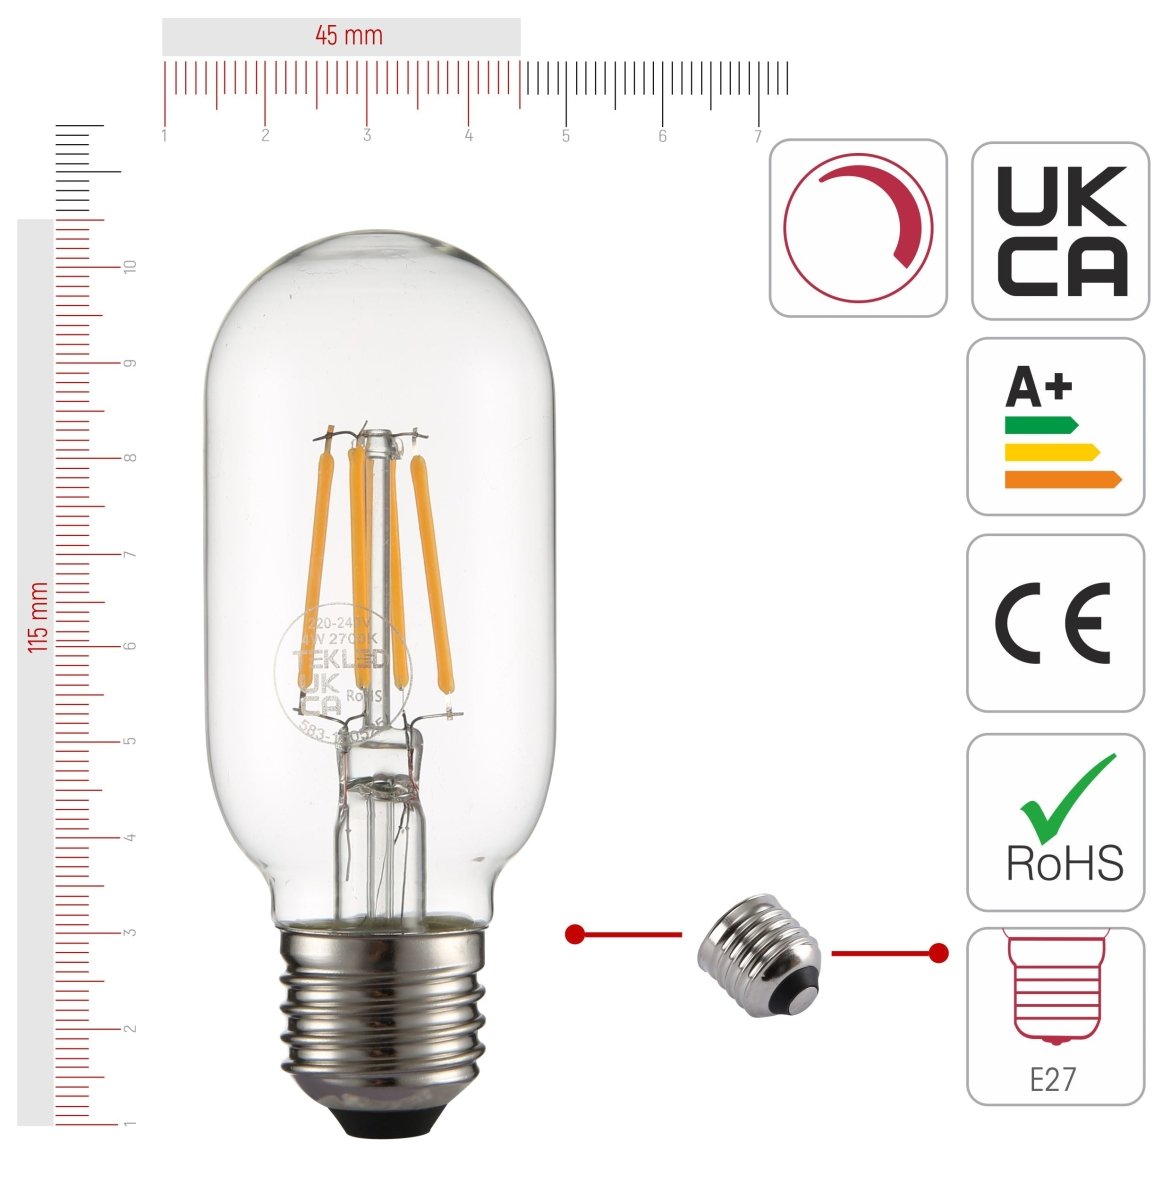 Size and certifications of LED Dimmable Filament Bulb T45 Tubular E27 Edison Screw 4W 470lm Warm White 2700K Clear Pack of 4 | TEKLED 583-150525